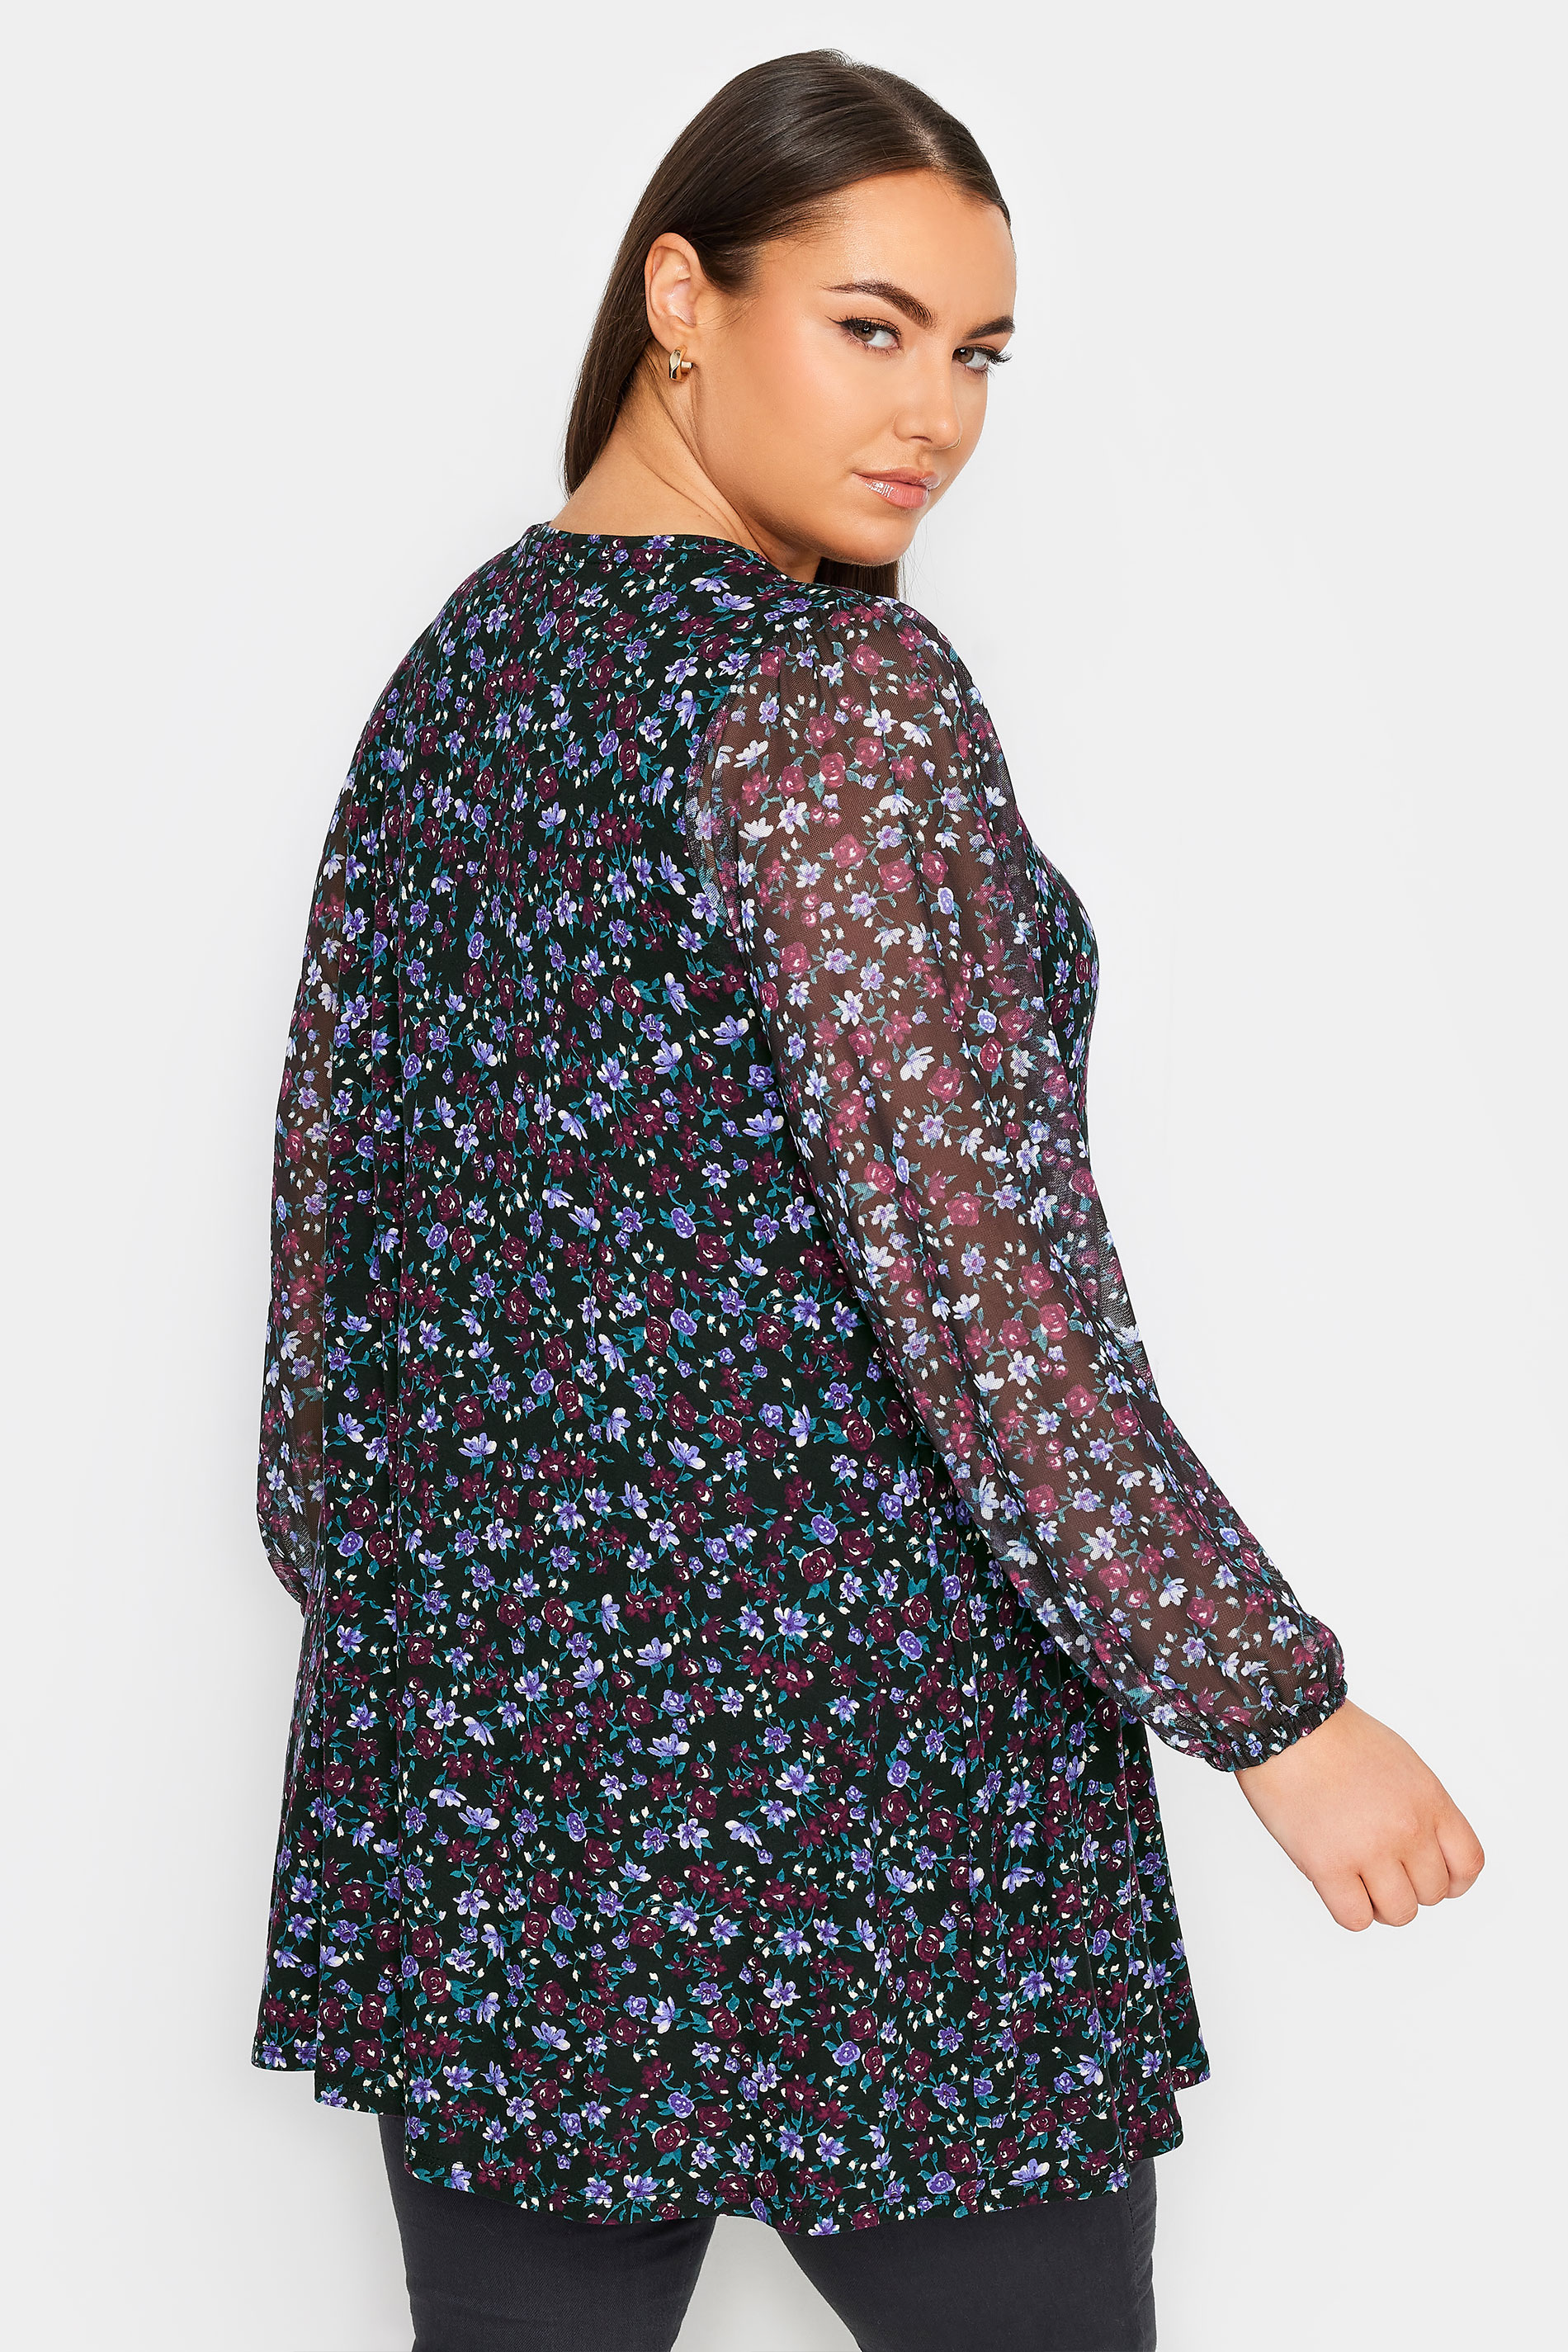 YOURS Plus Size Blue Floral Print Mesh Sleeve Top | Yours Clothing 3